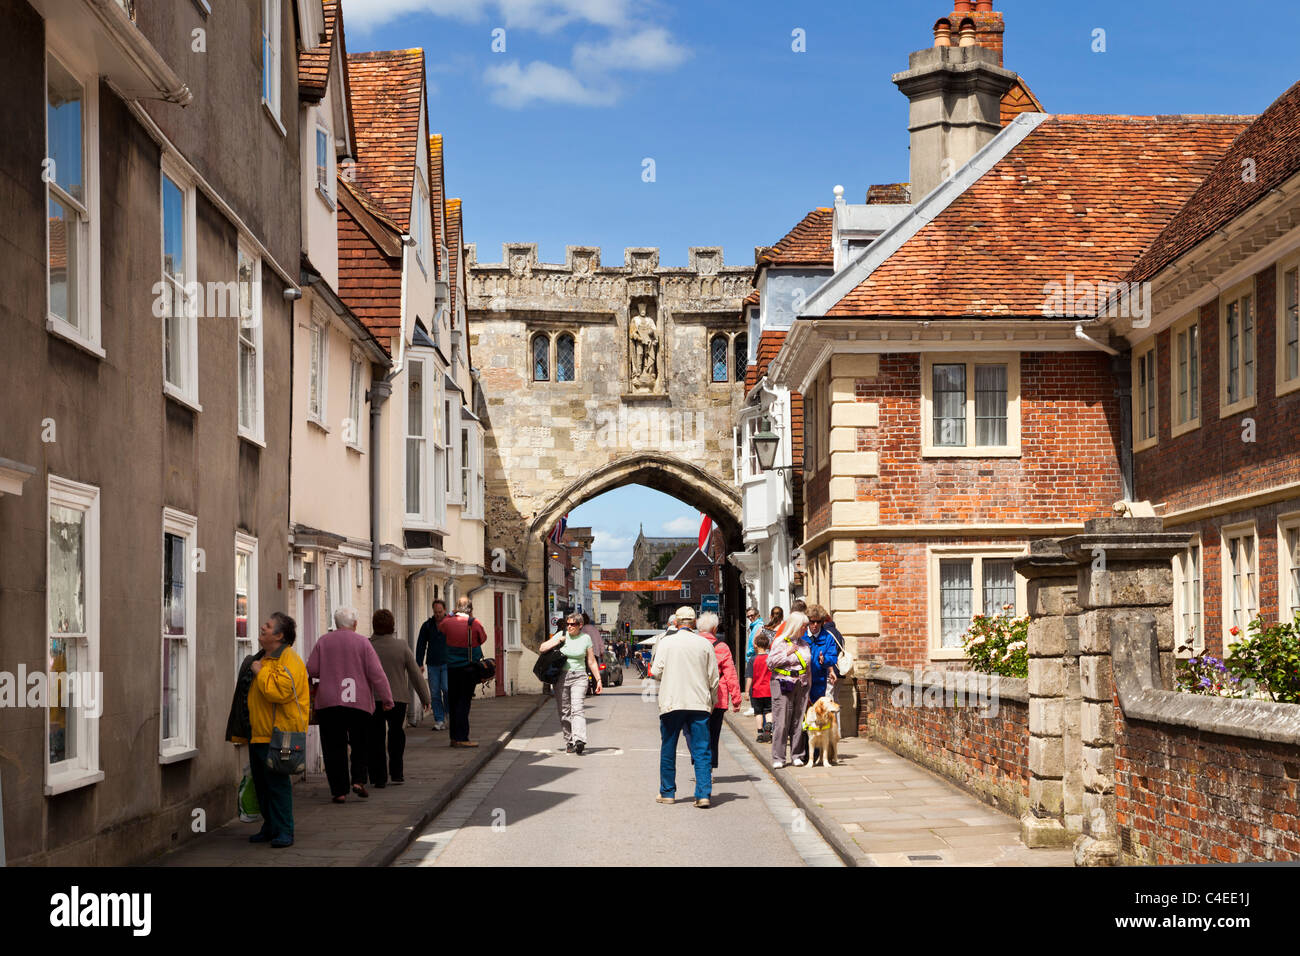 Salisbury, Wiltshire - Cathedral Close and High Street Gate, Salisbury, Wiltshire, England, UK Stock Photo